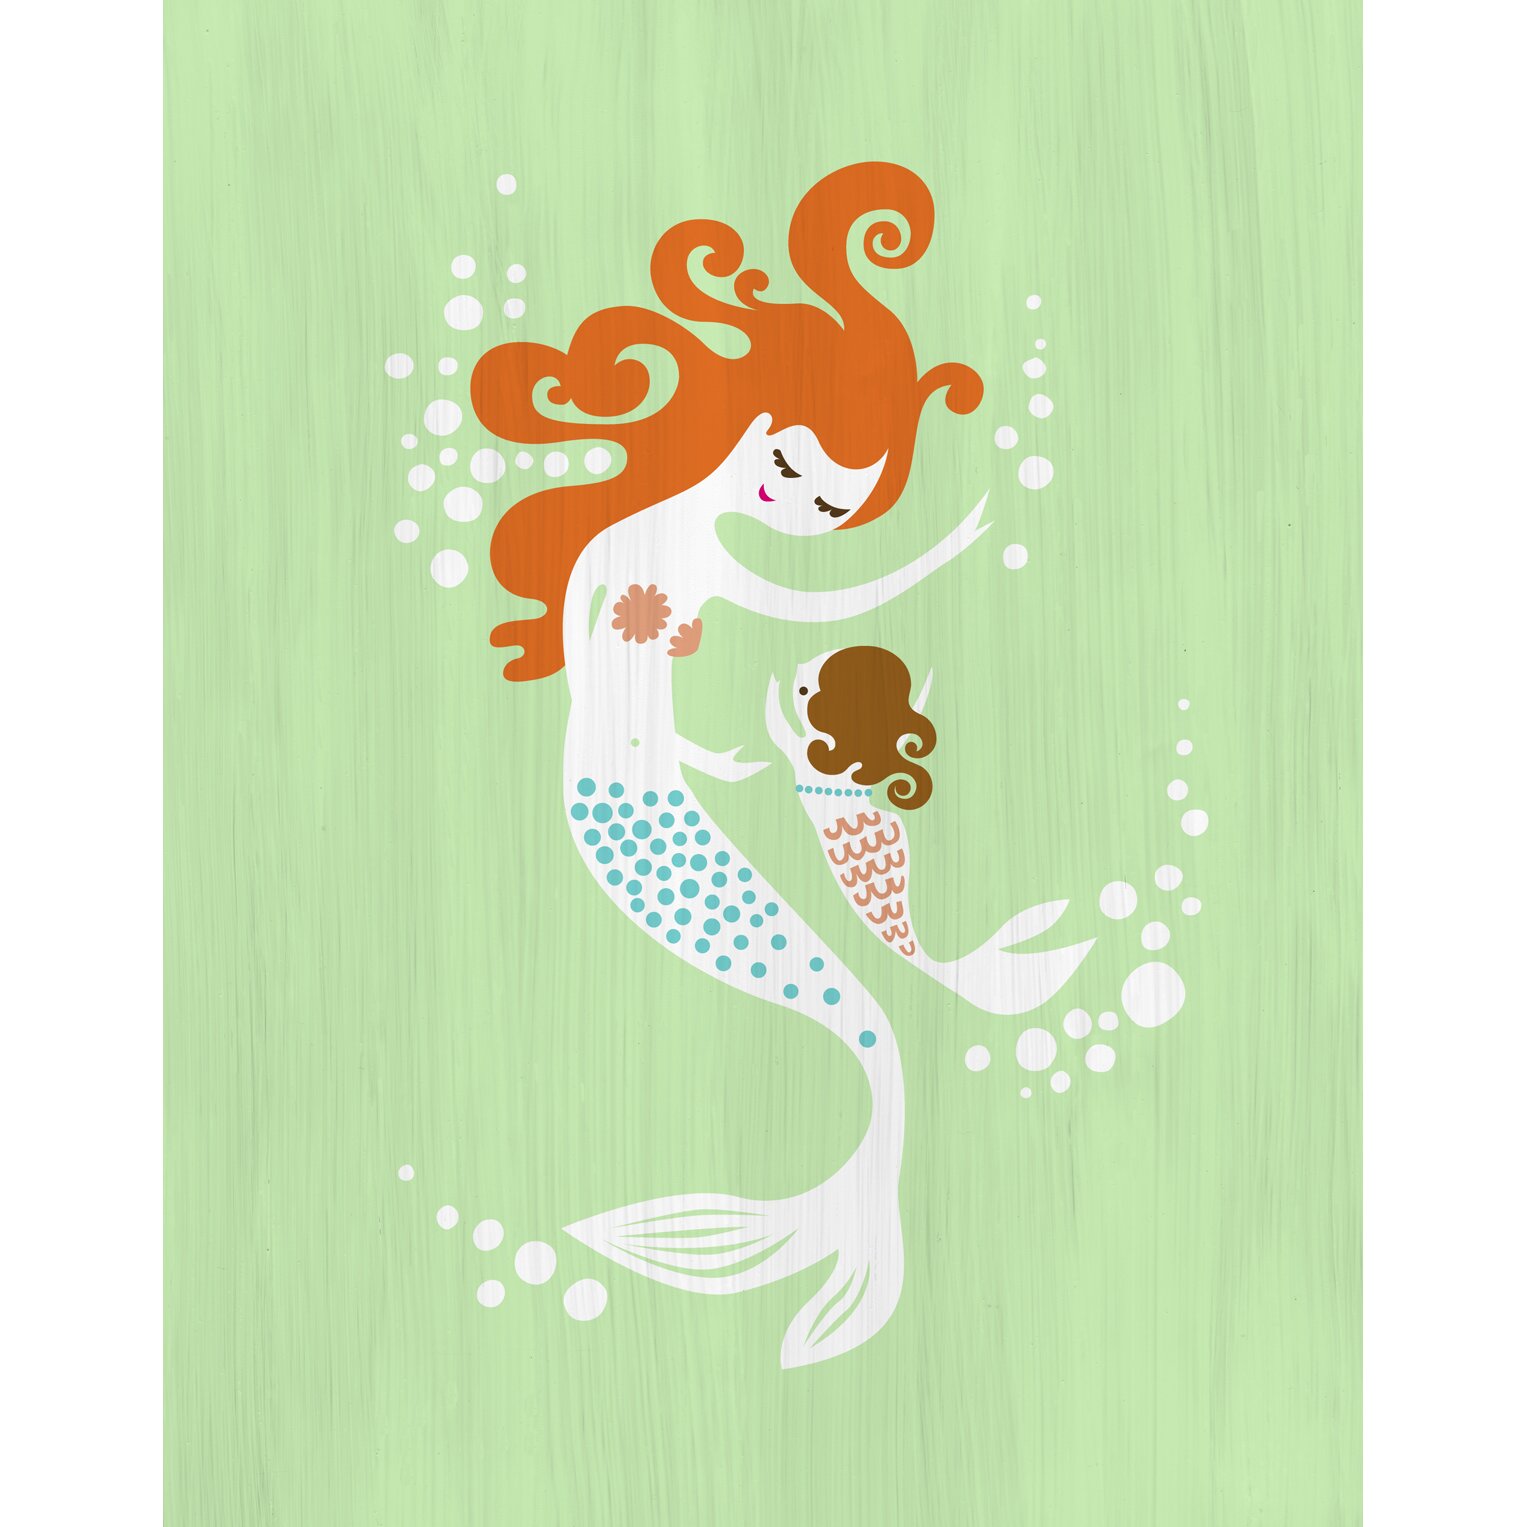 Mermaid and Baby Girl Paper Print by Evive Designs